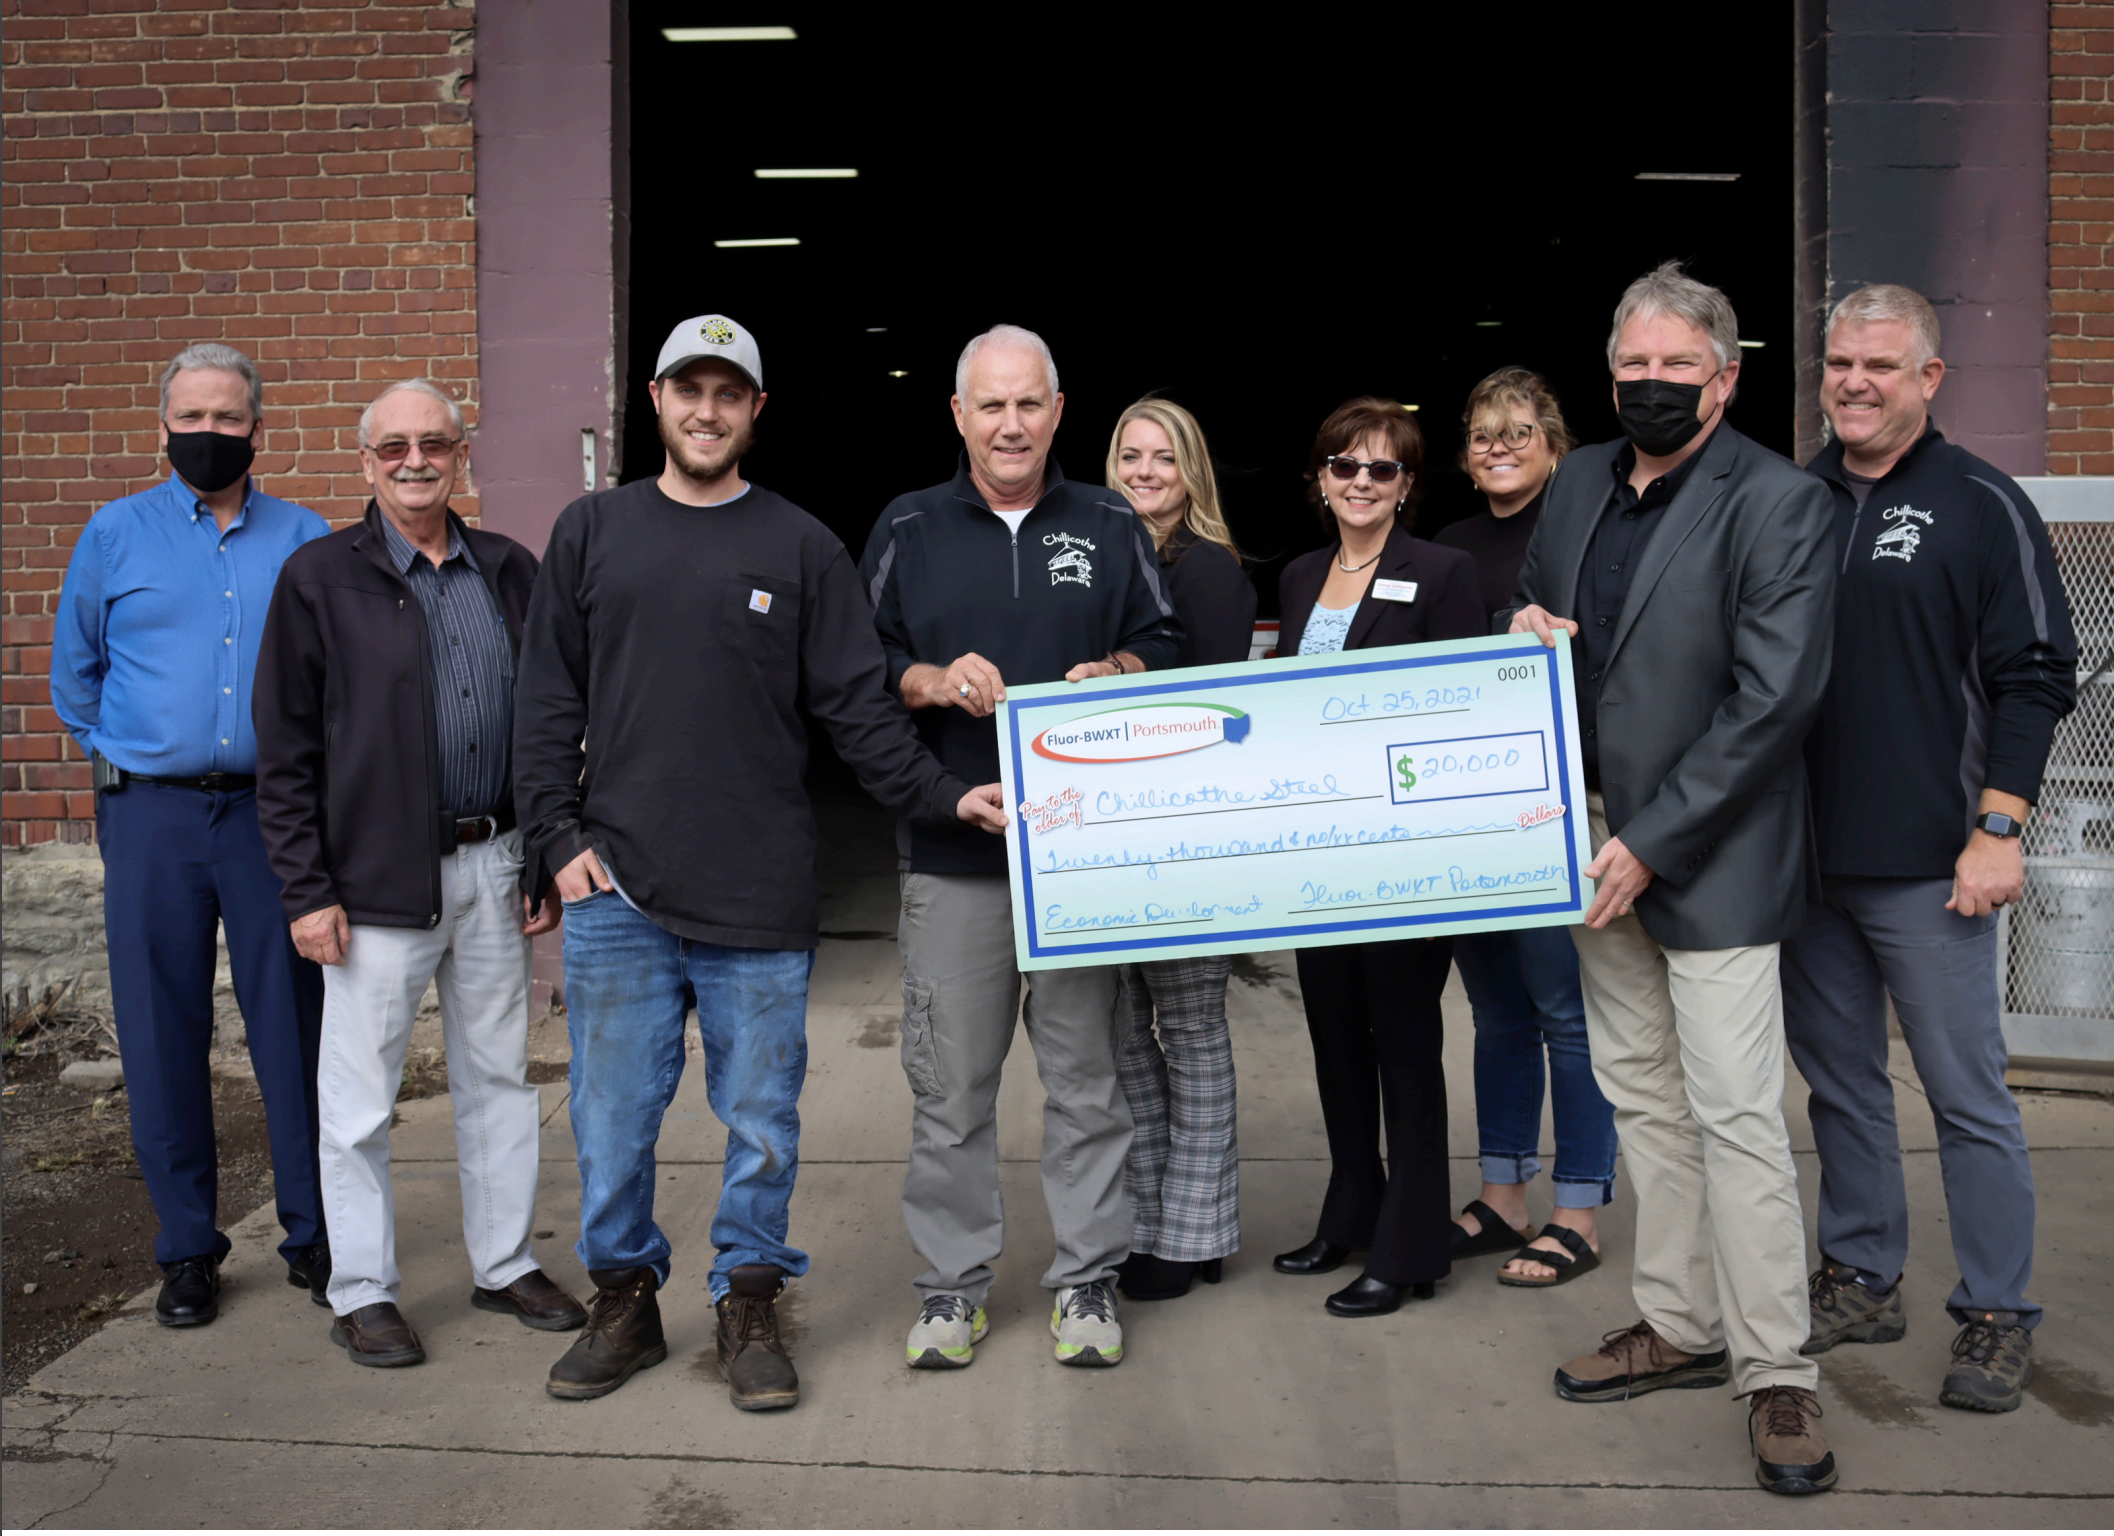 Featured image for “Fluor-BWXT Donates $20,000 to Chillicothe Steel for Expansion Project”